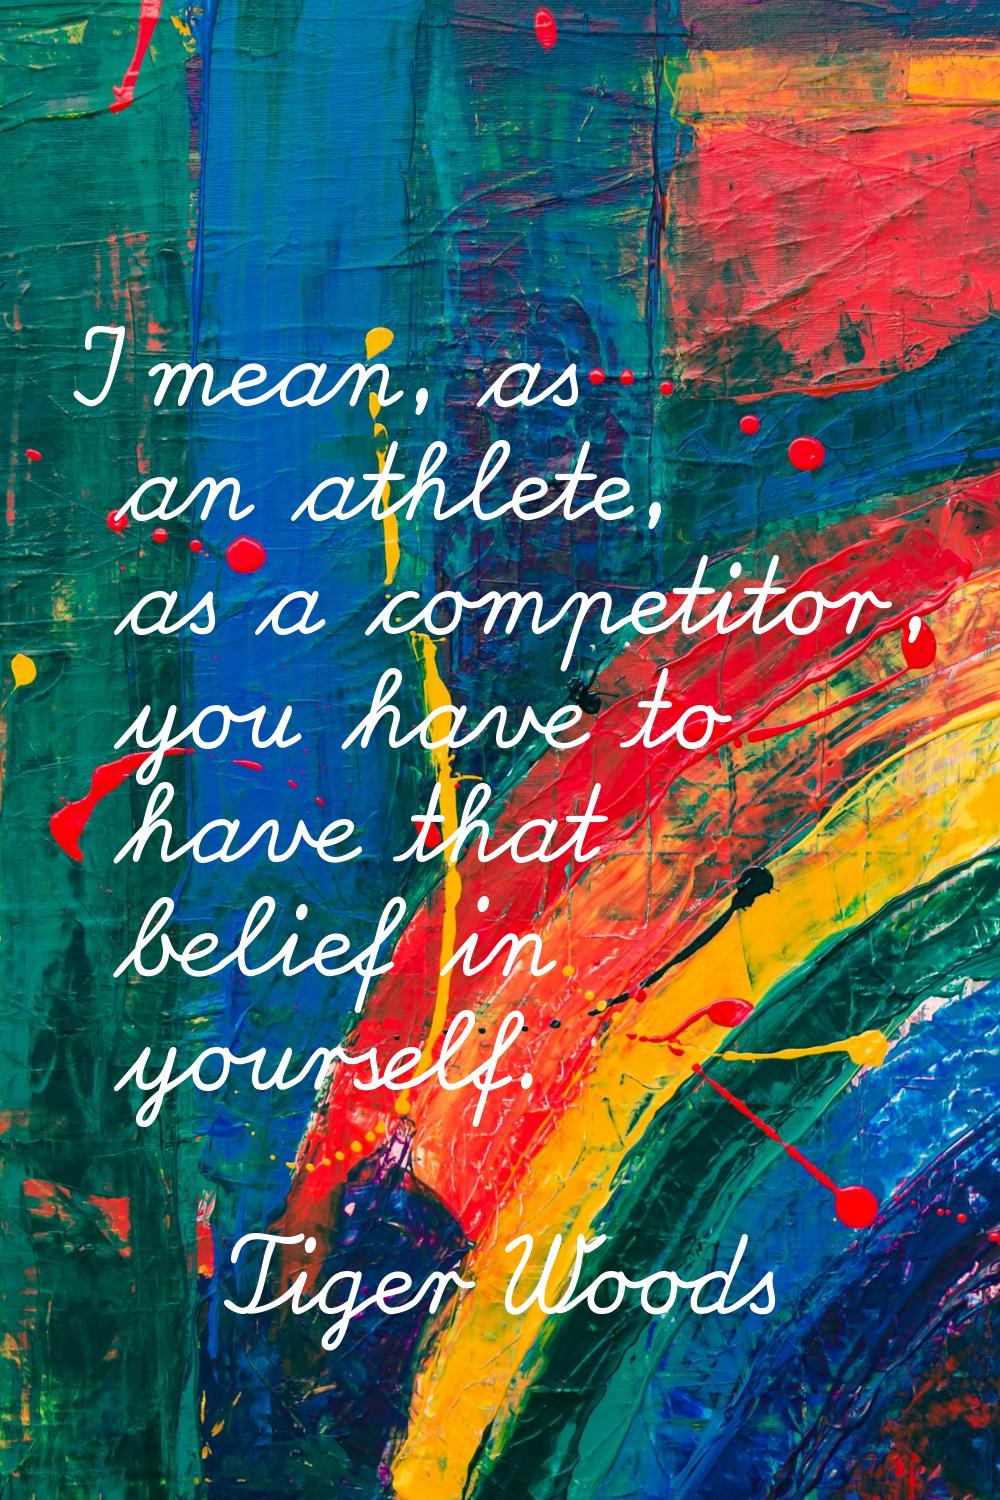 I mean, as an athlete, as a competitor, you have to have that belief in yourself.